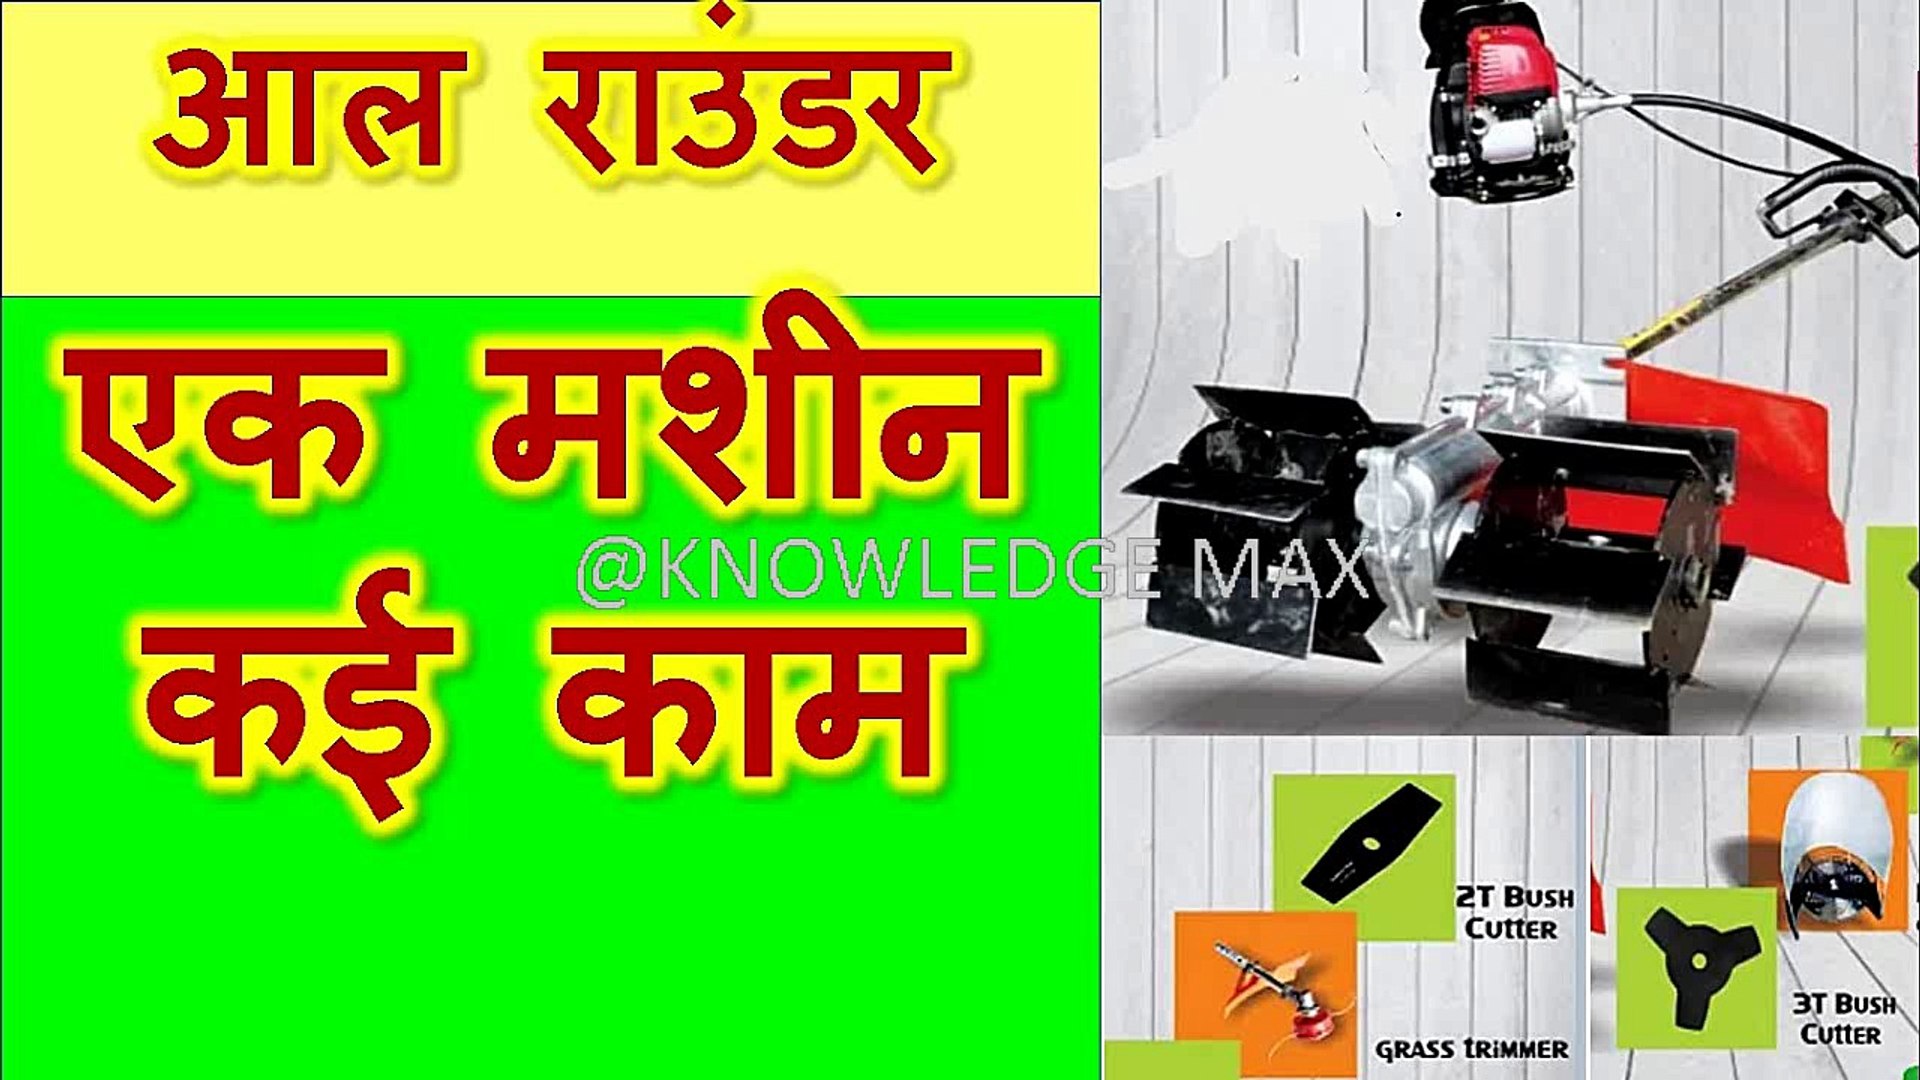 All Rounder - Agricultural Machines. Machines for Farmers